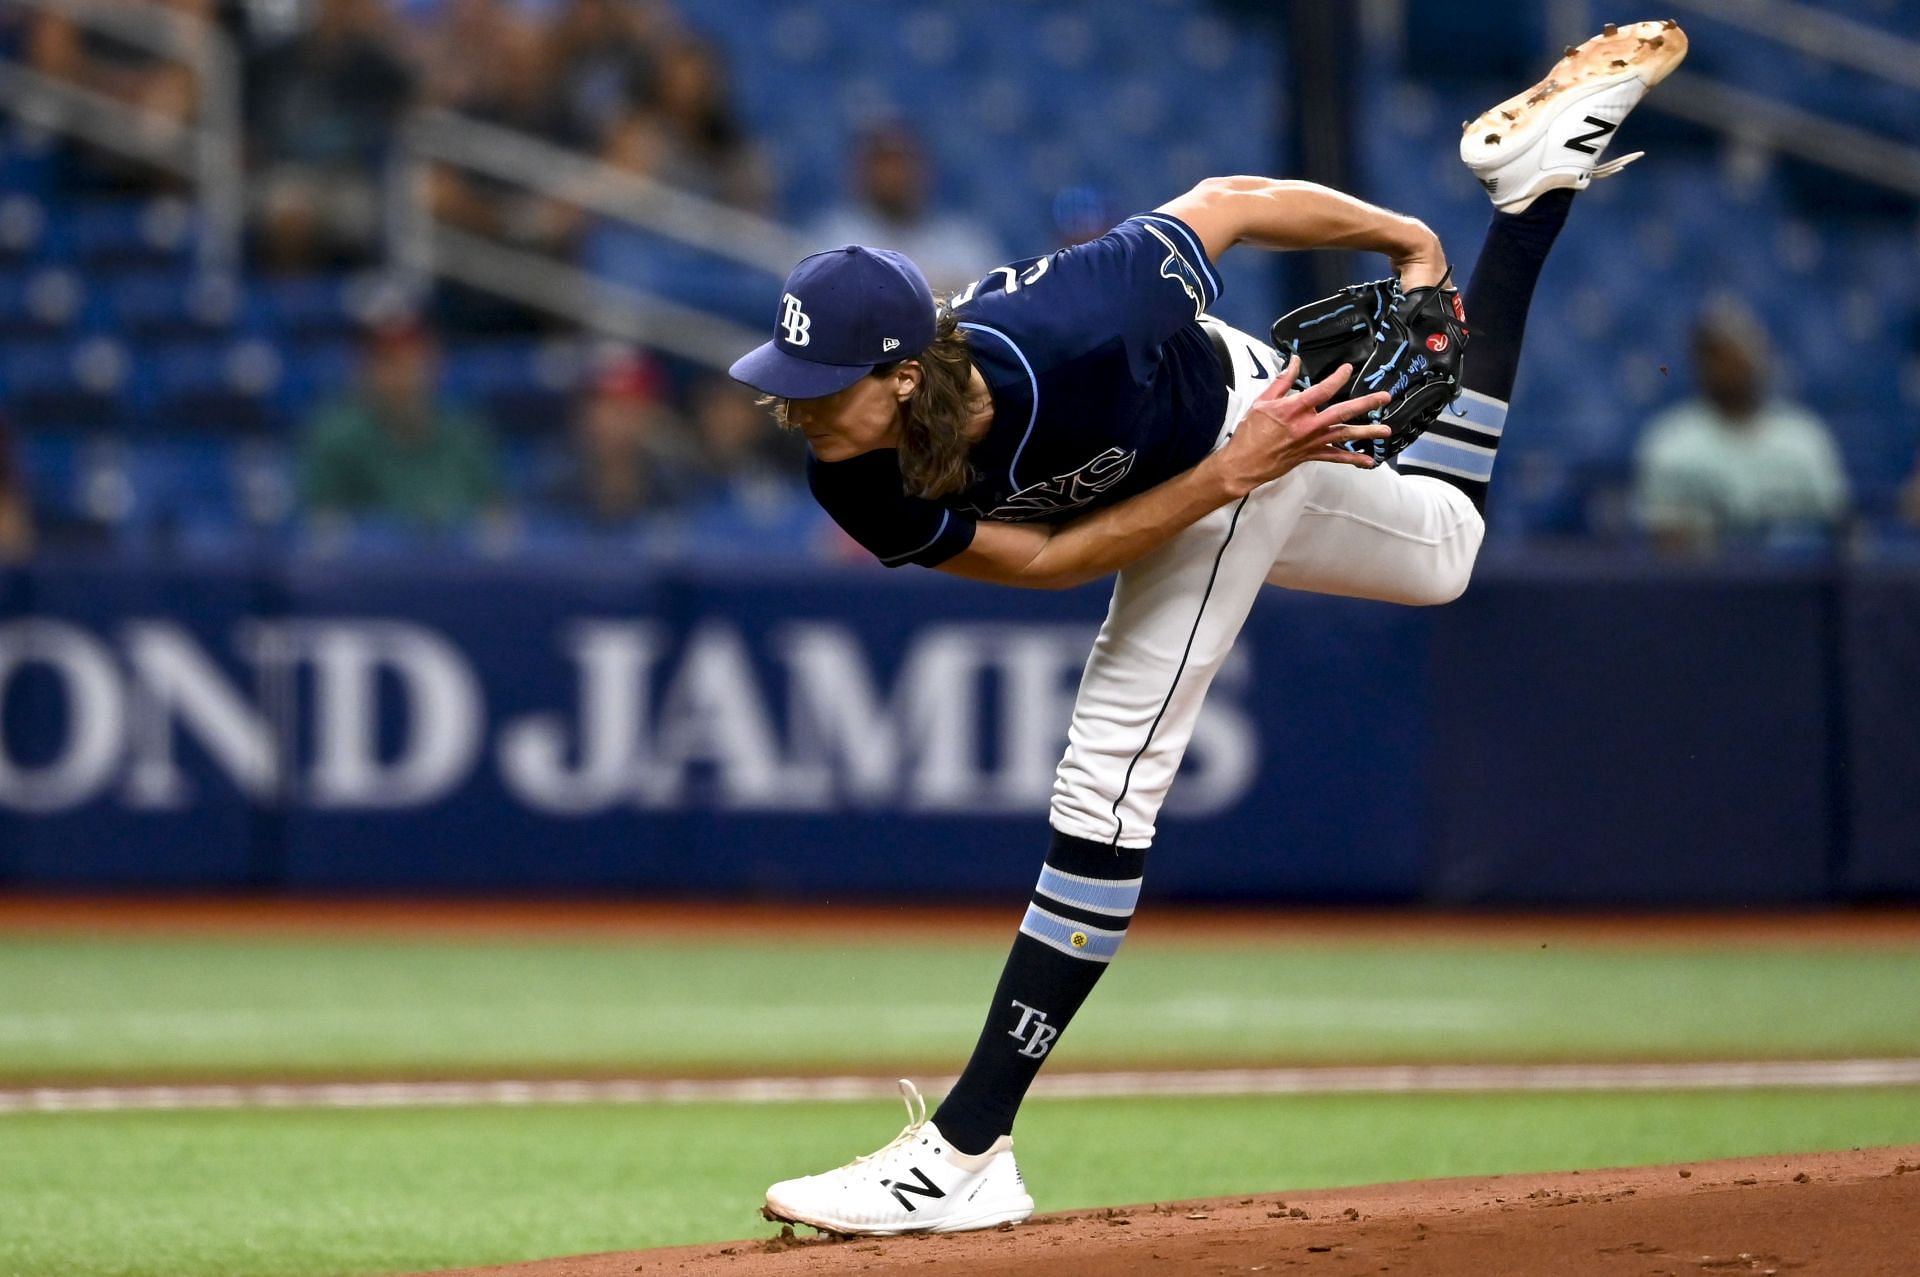 Tampa Bay Rays, RHP Tyler Glasnow agree to two-year MLB extension